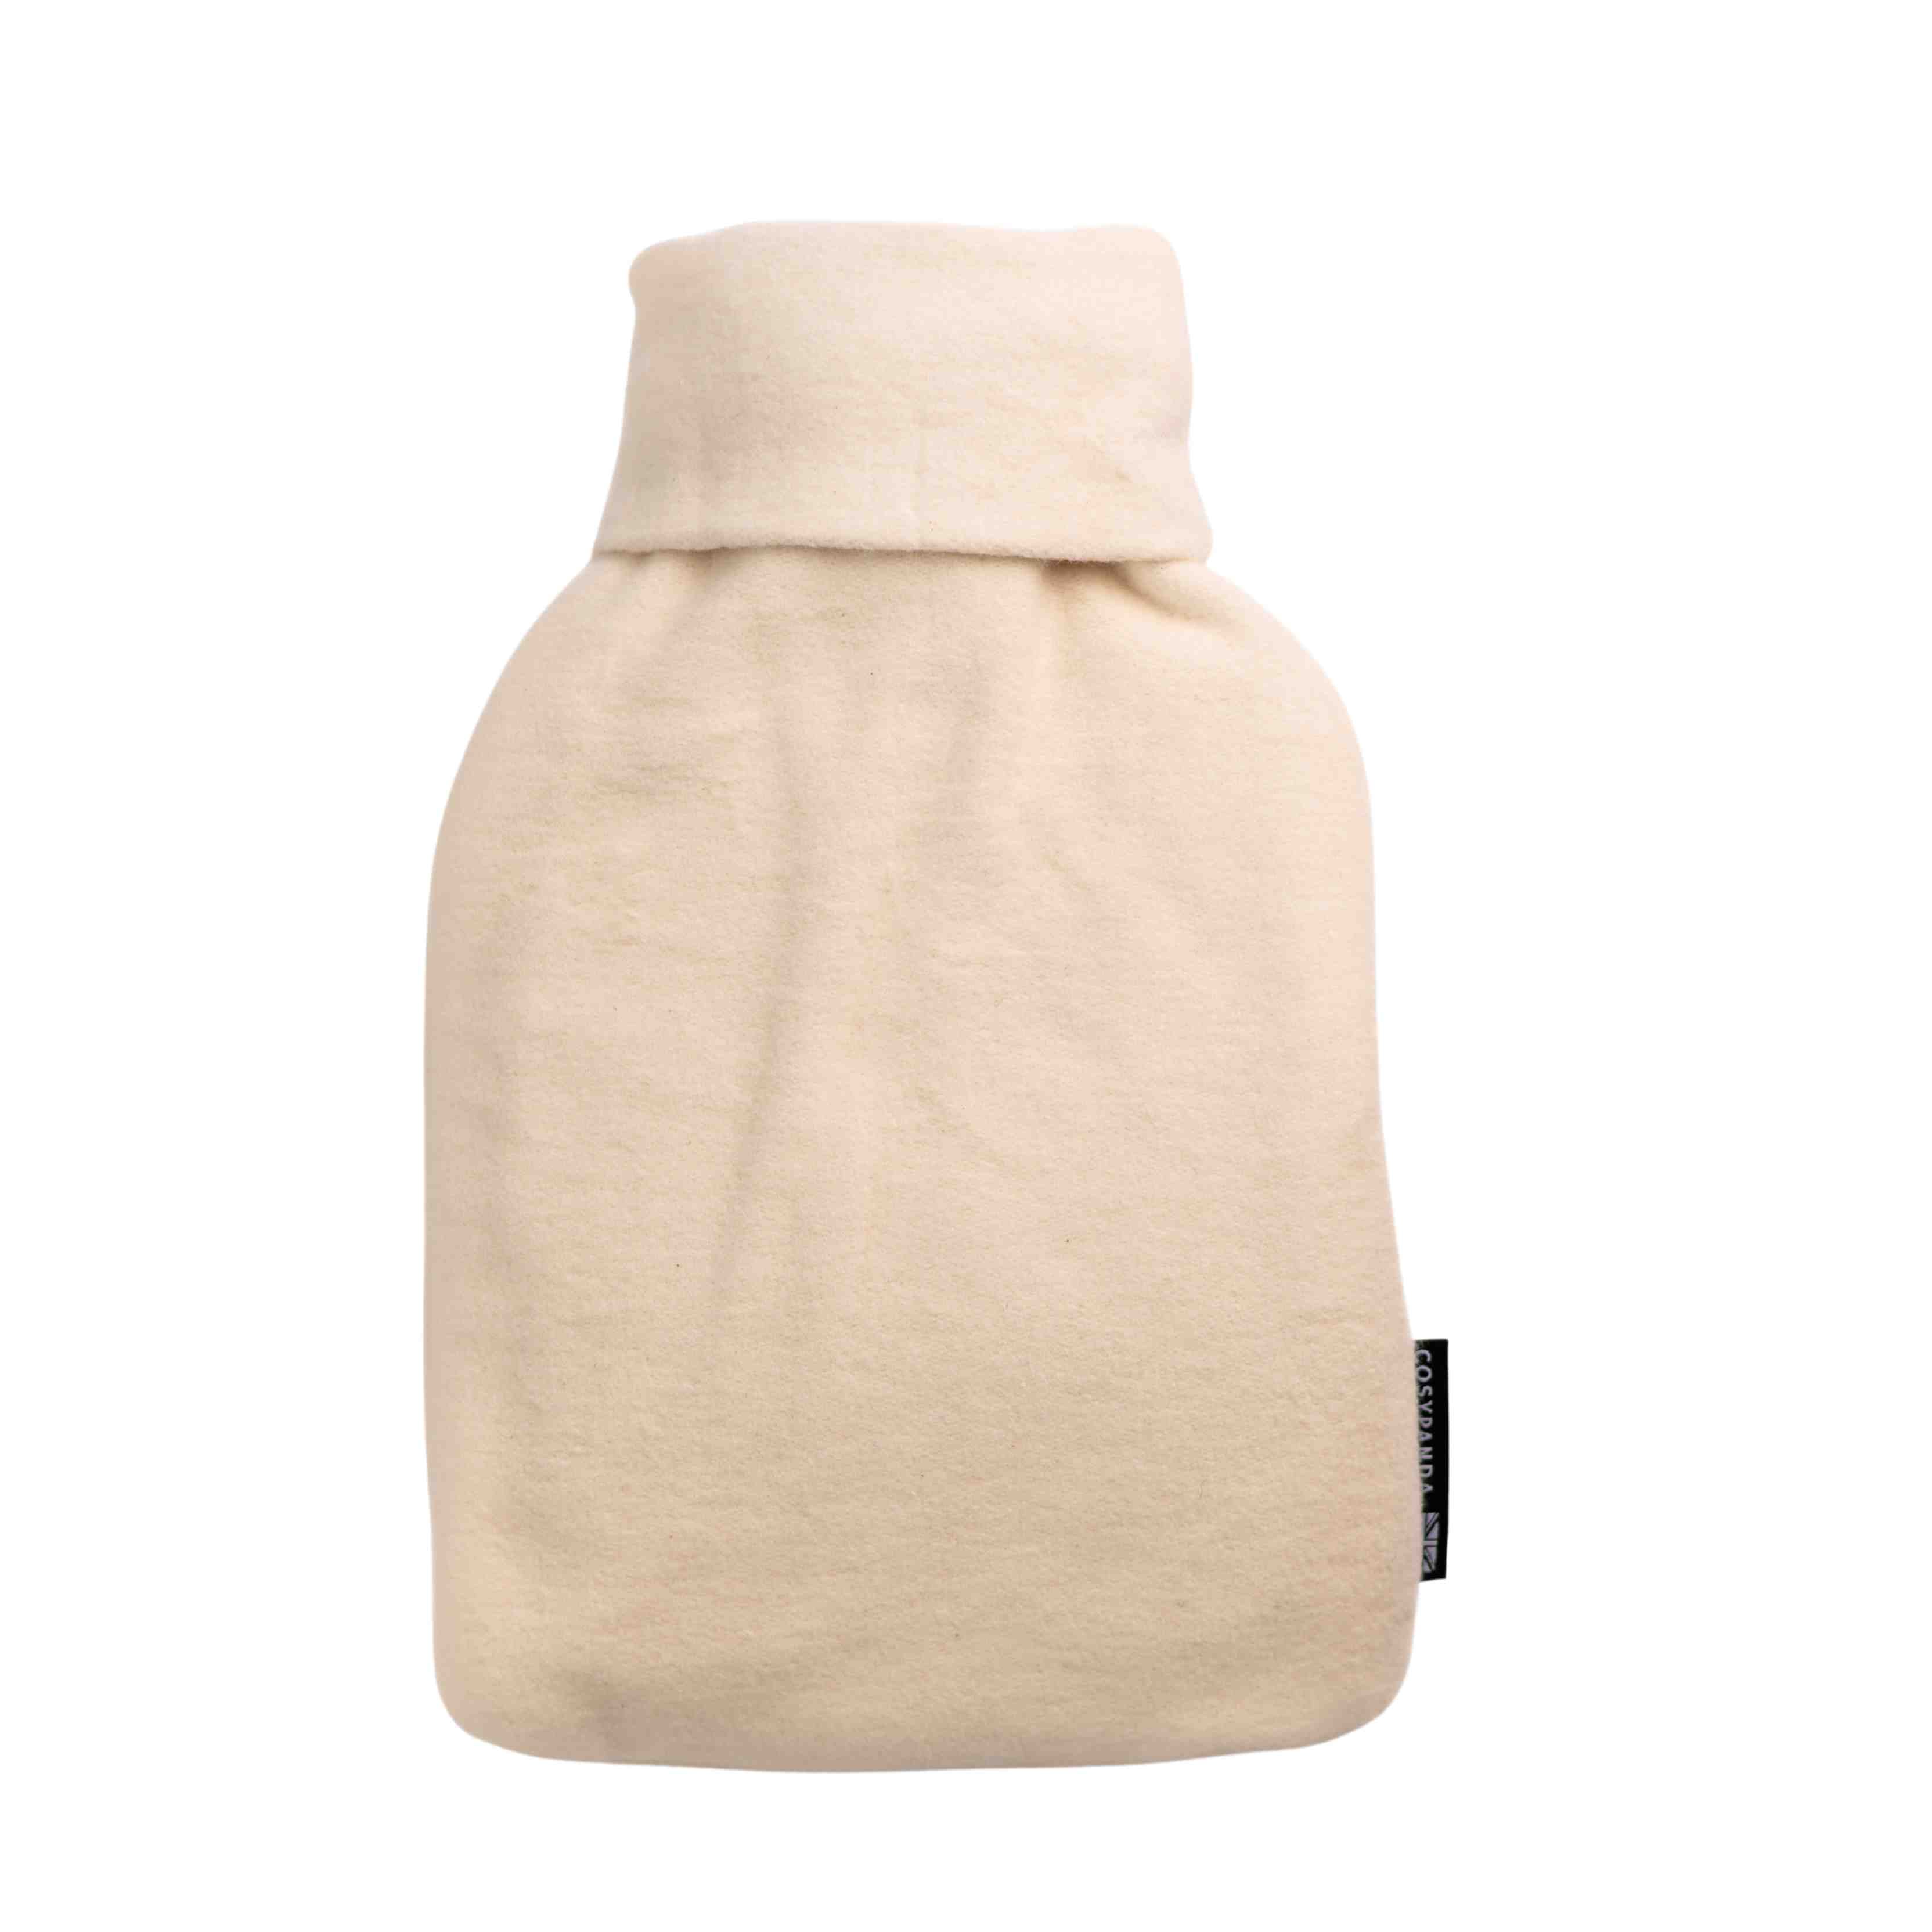 Hot Water Bottle for Baby and Children, Organic Cotton Fleece Cover